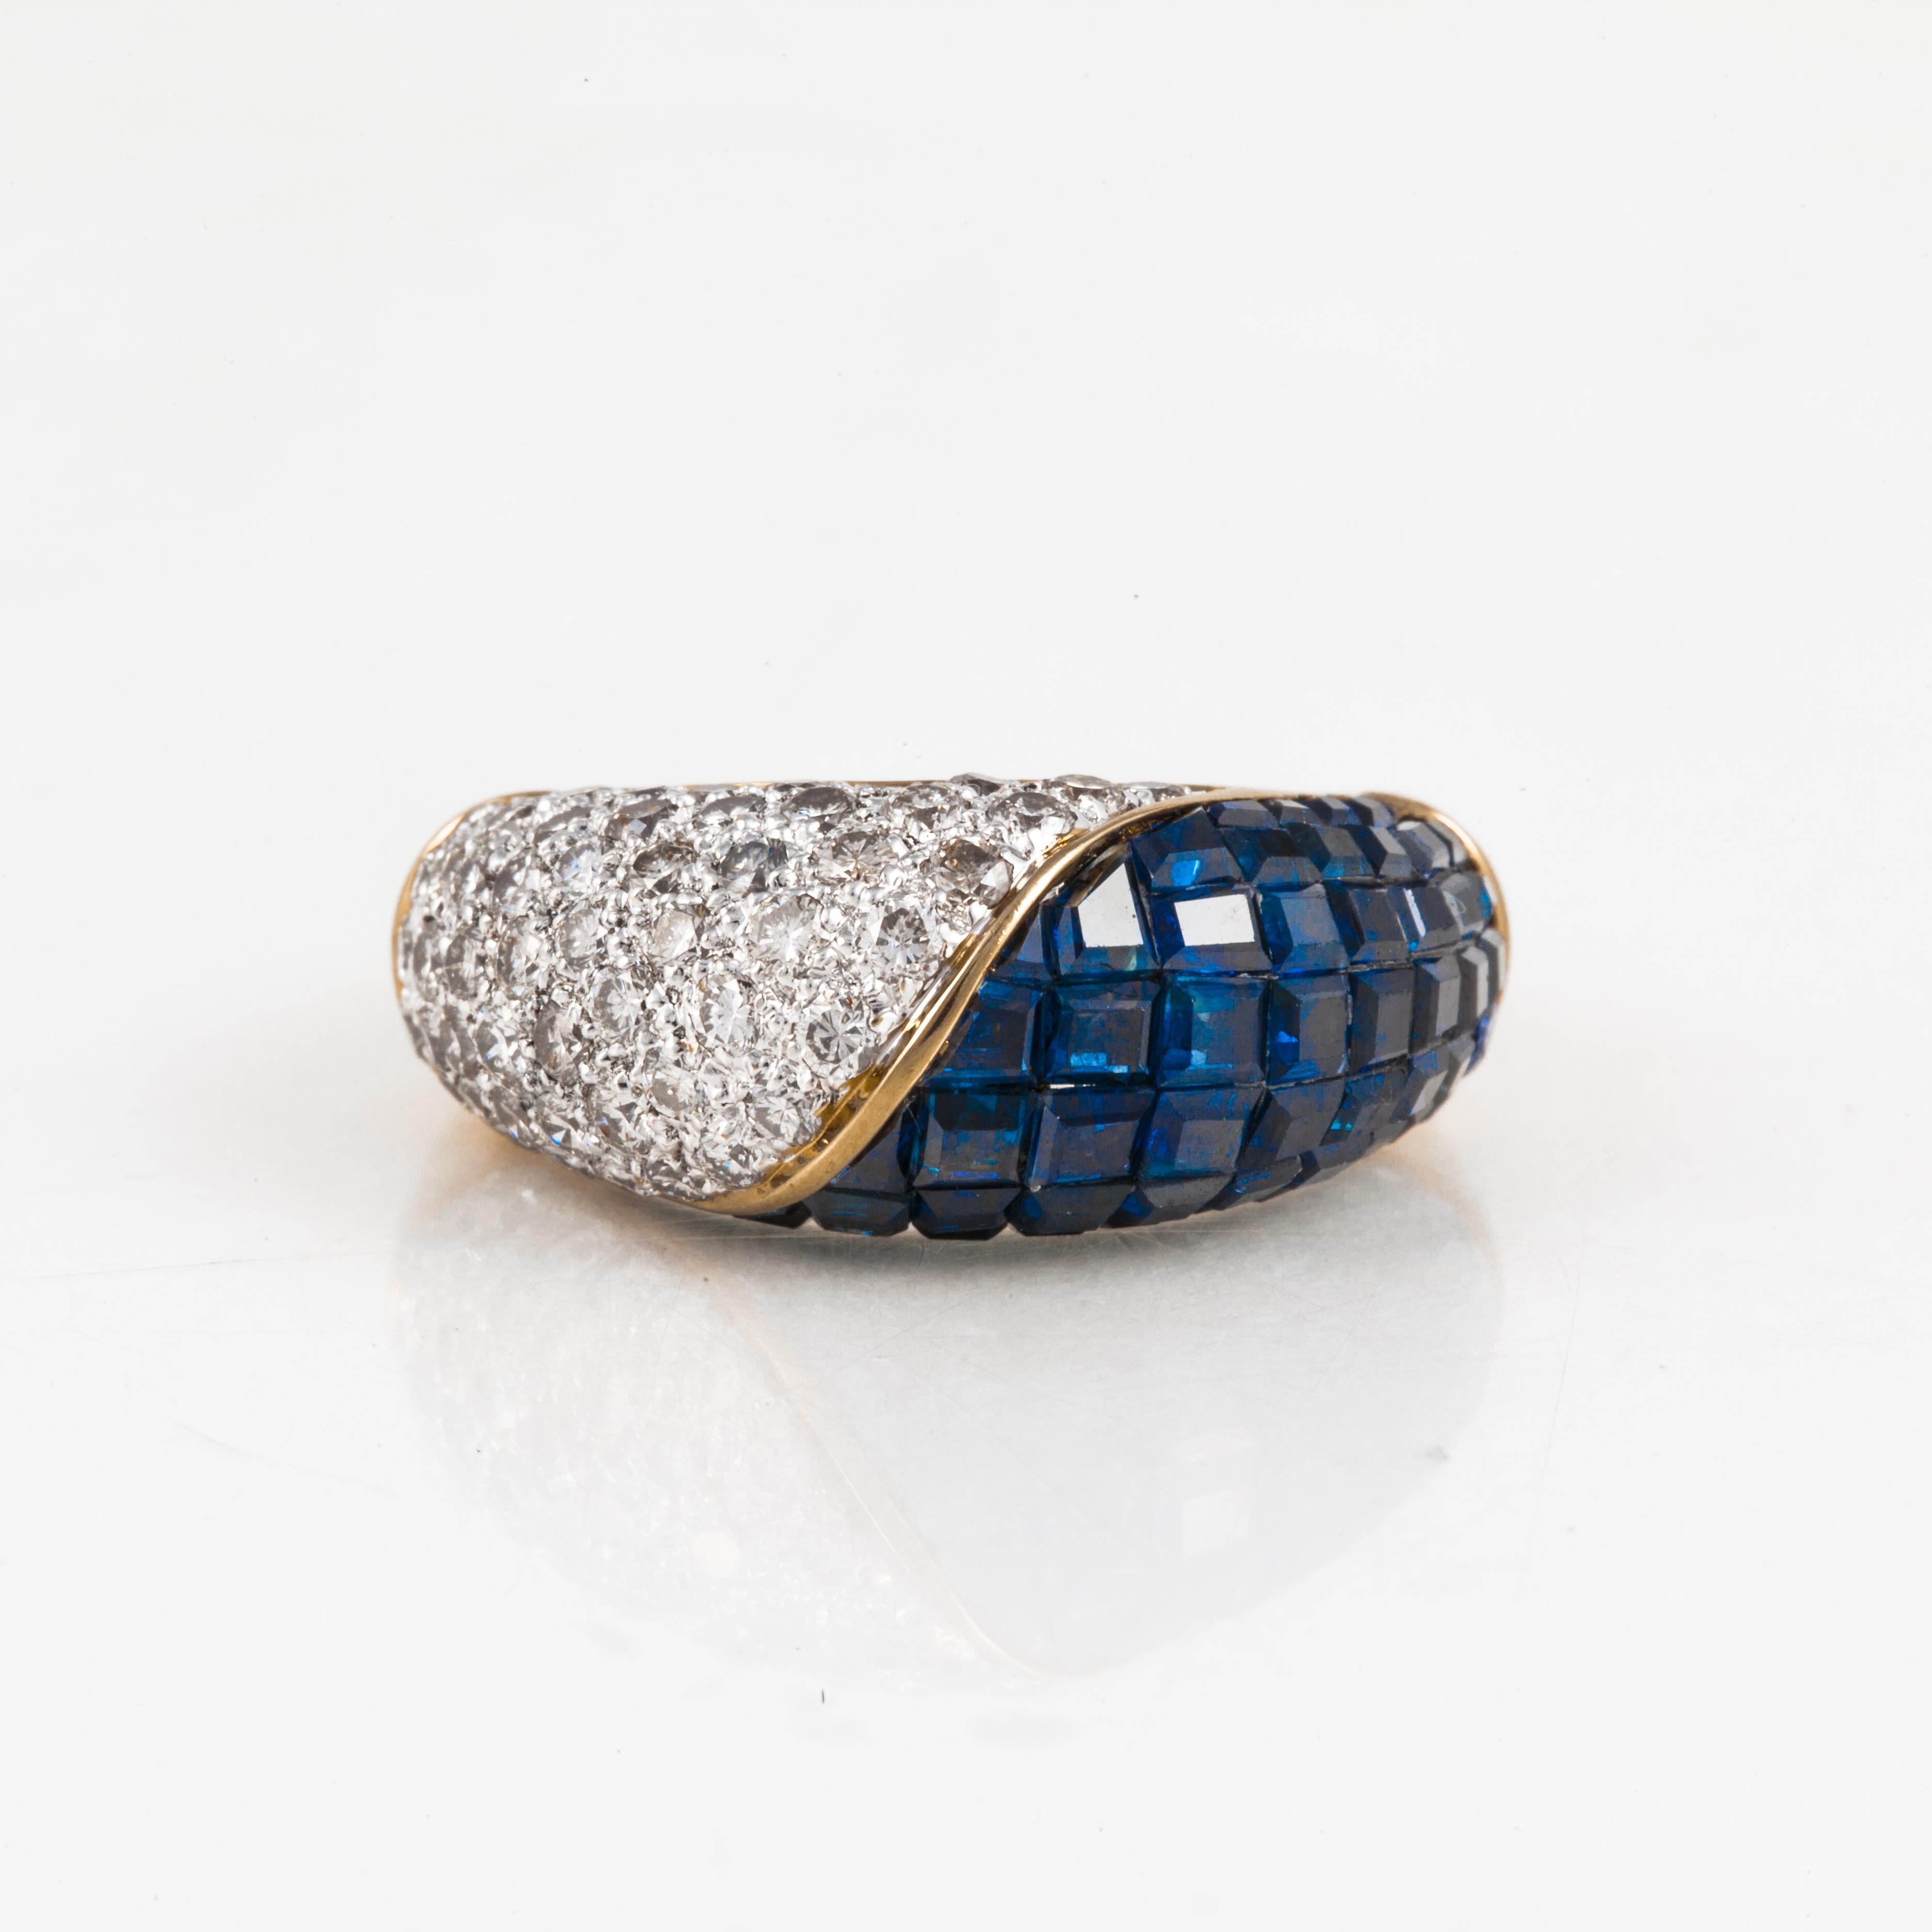 18K yellow gold ring with diamonds and blue sapphires.  There are 52 round diamonds that total 1.30 carats; H-I color and VS-SI clarity.  In addition, there are 54 square-cut invisible-set blue sapphires. It measures 7/8 inches by 3/8 inches and